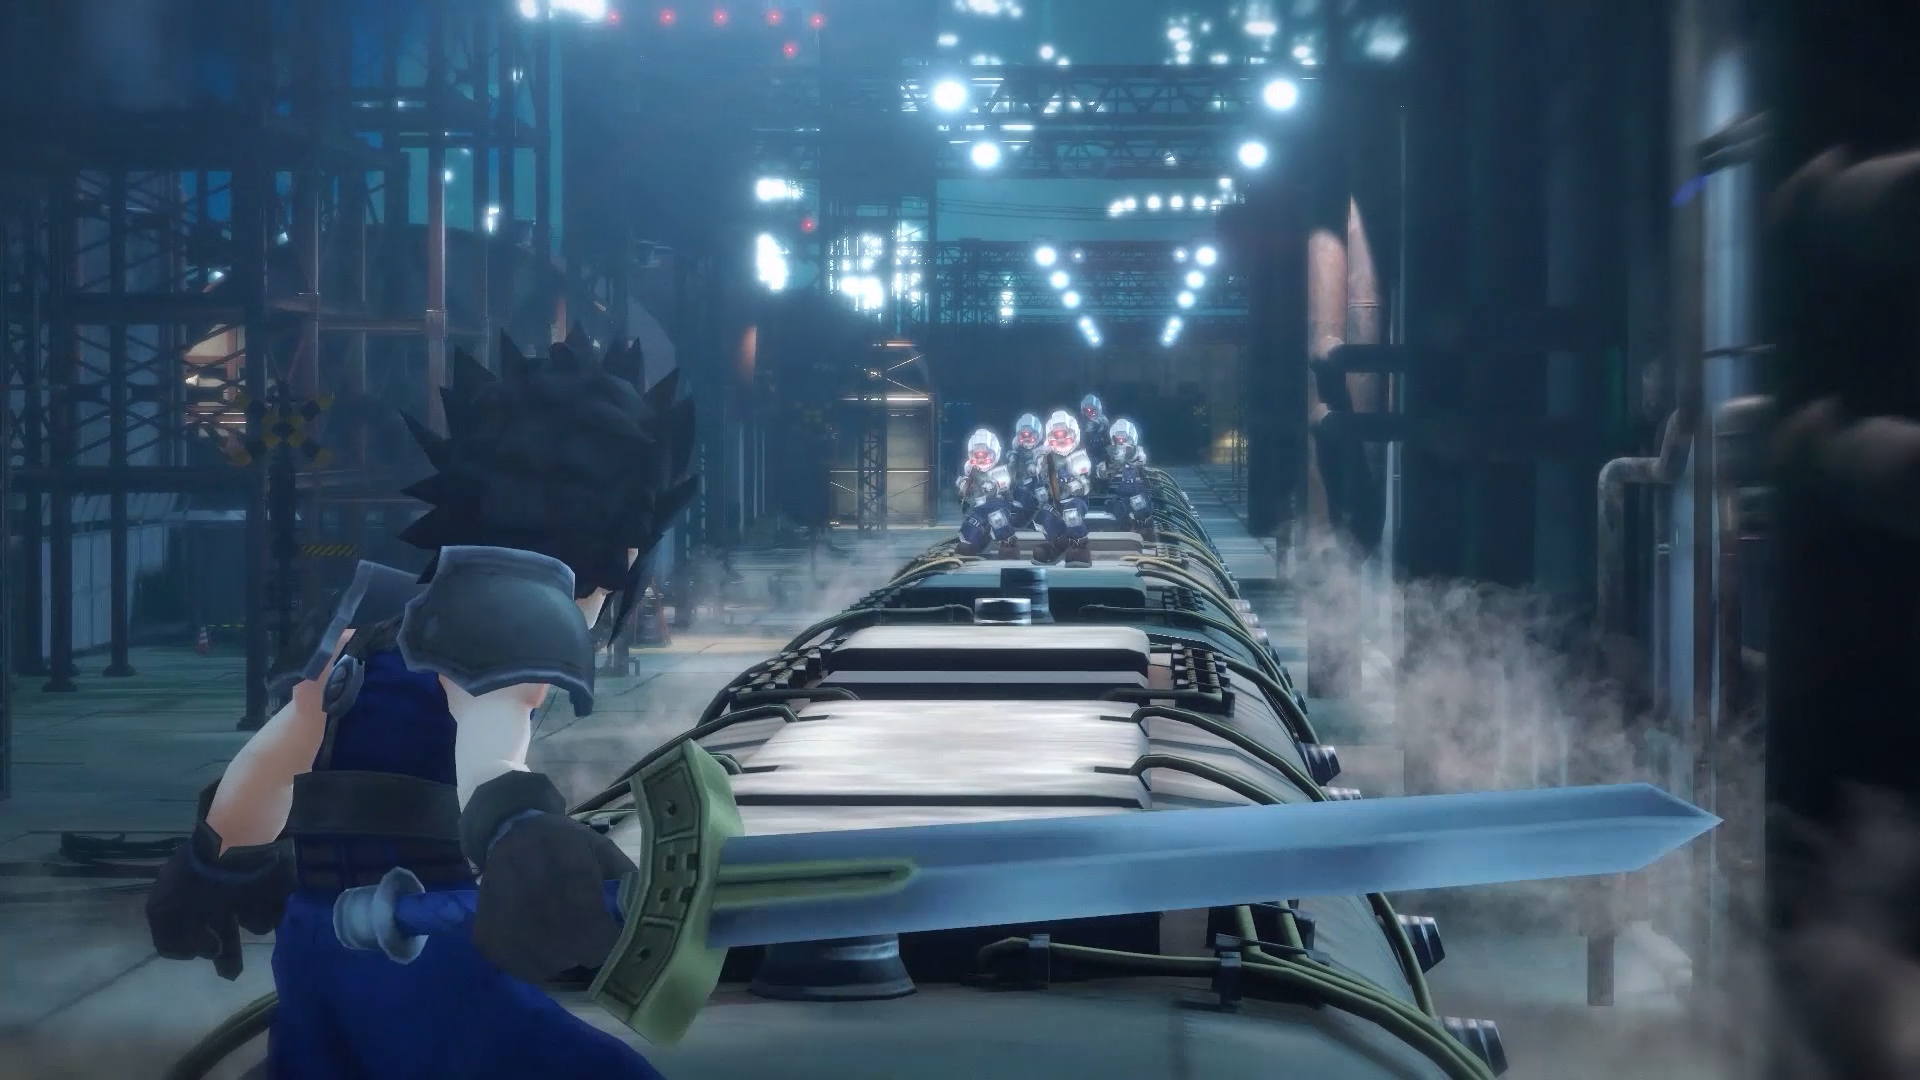 Final Fantasy VII: Fans Get Their Reboot After Years of